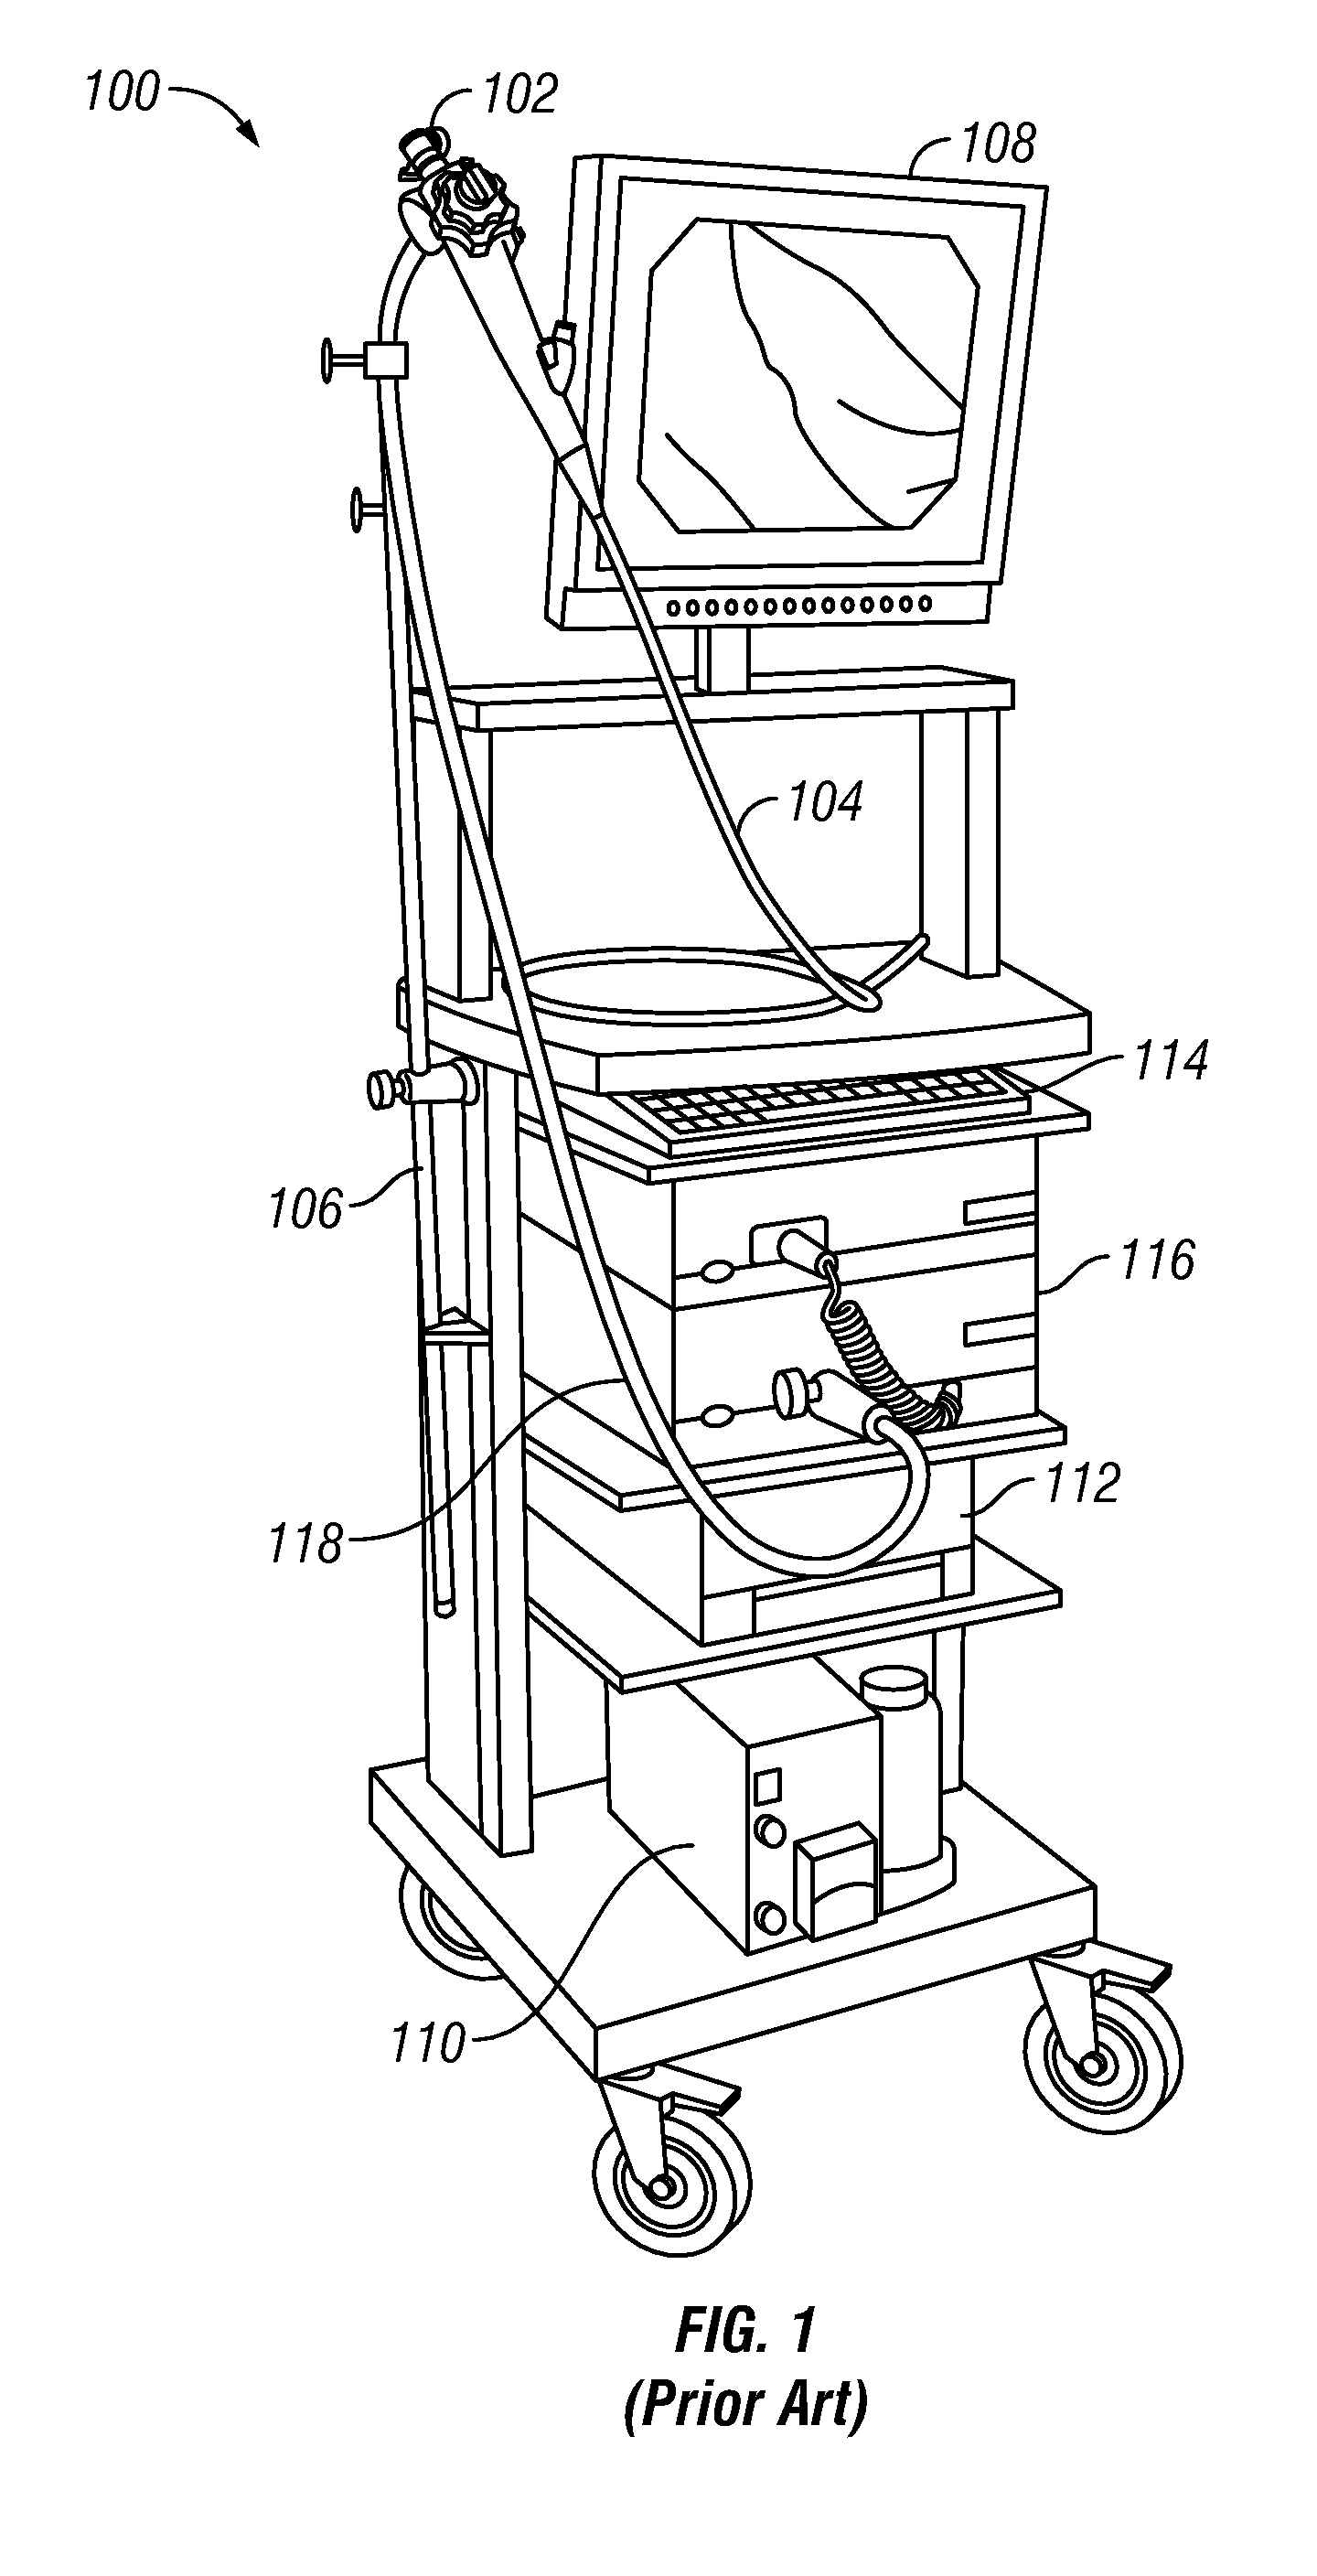 System and Method for Wirelessly Transmitting Operational Data From an Endoscope to a Remote Device